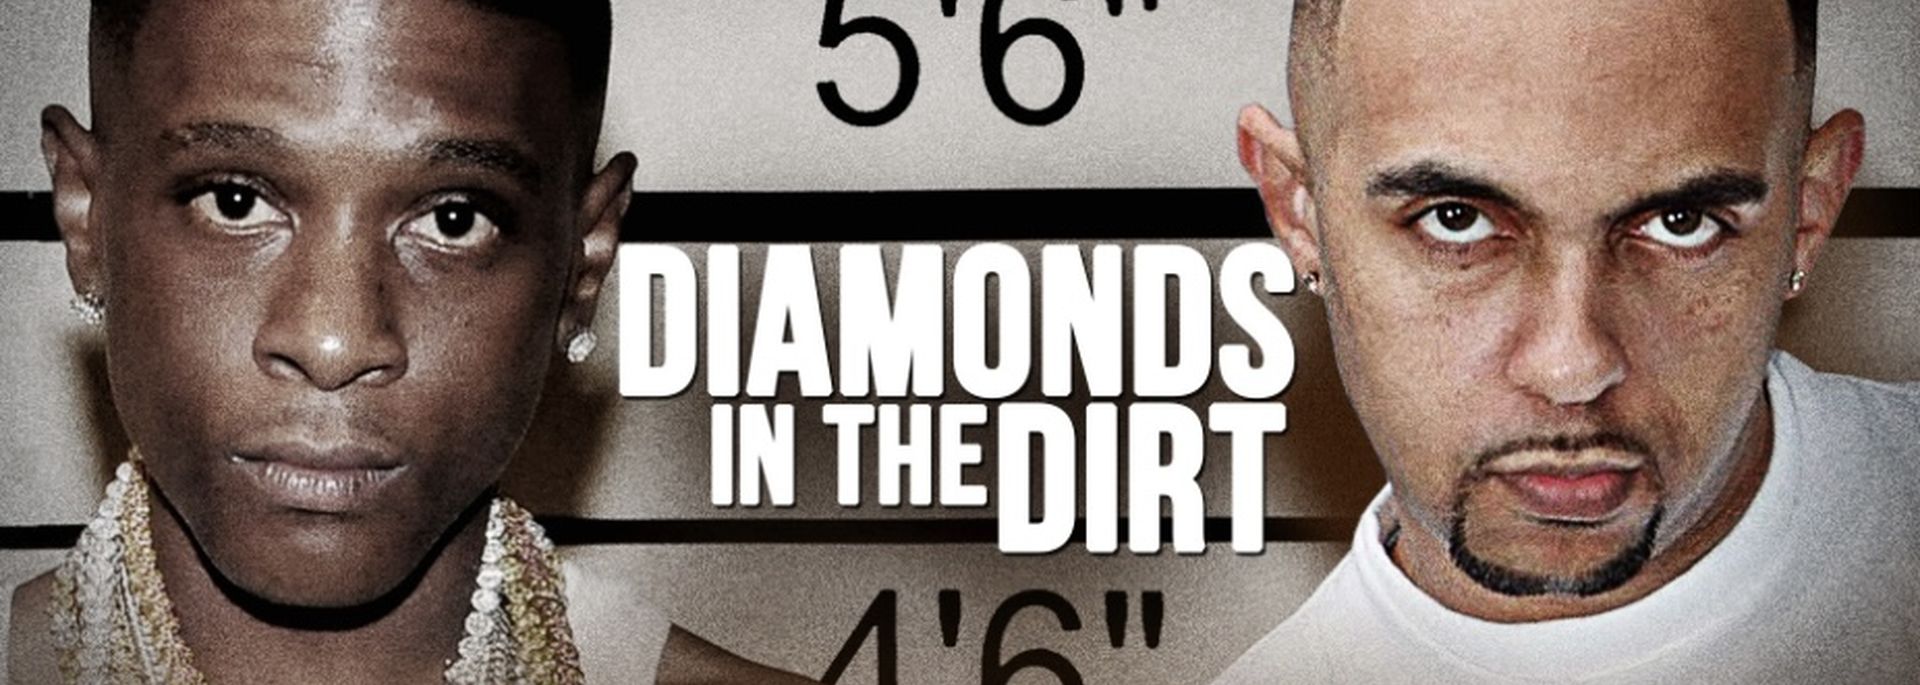 DIAMONDS IN THE DIRT (Official Trailer)